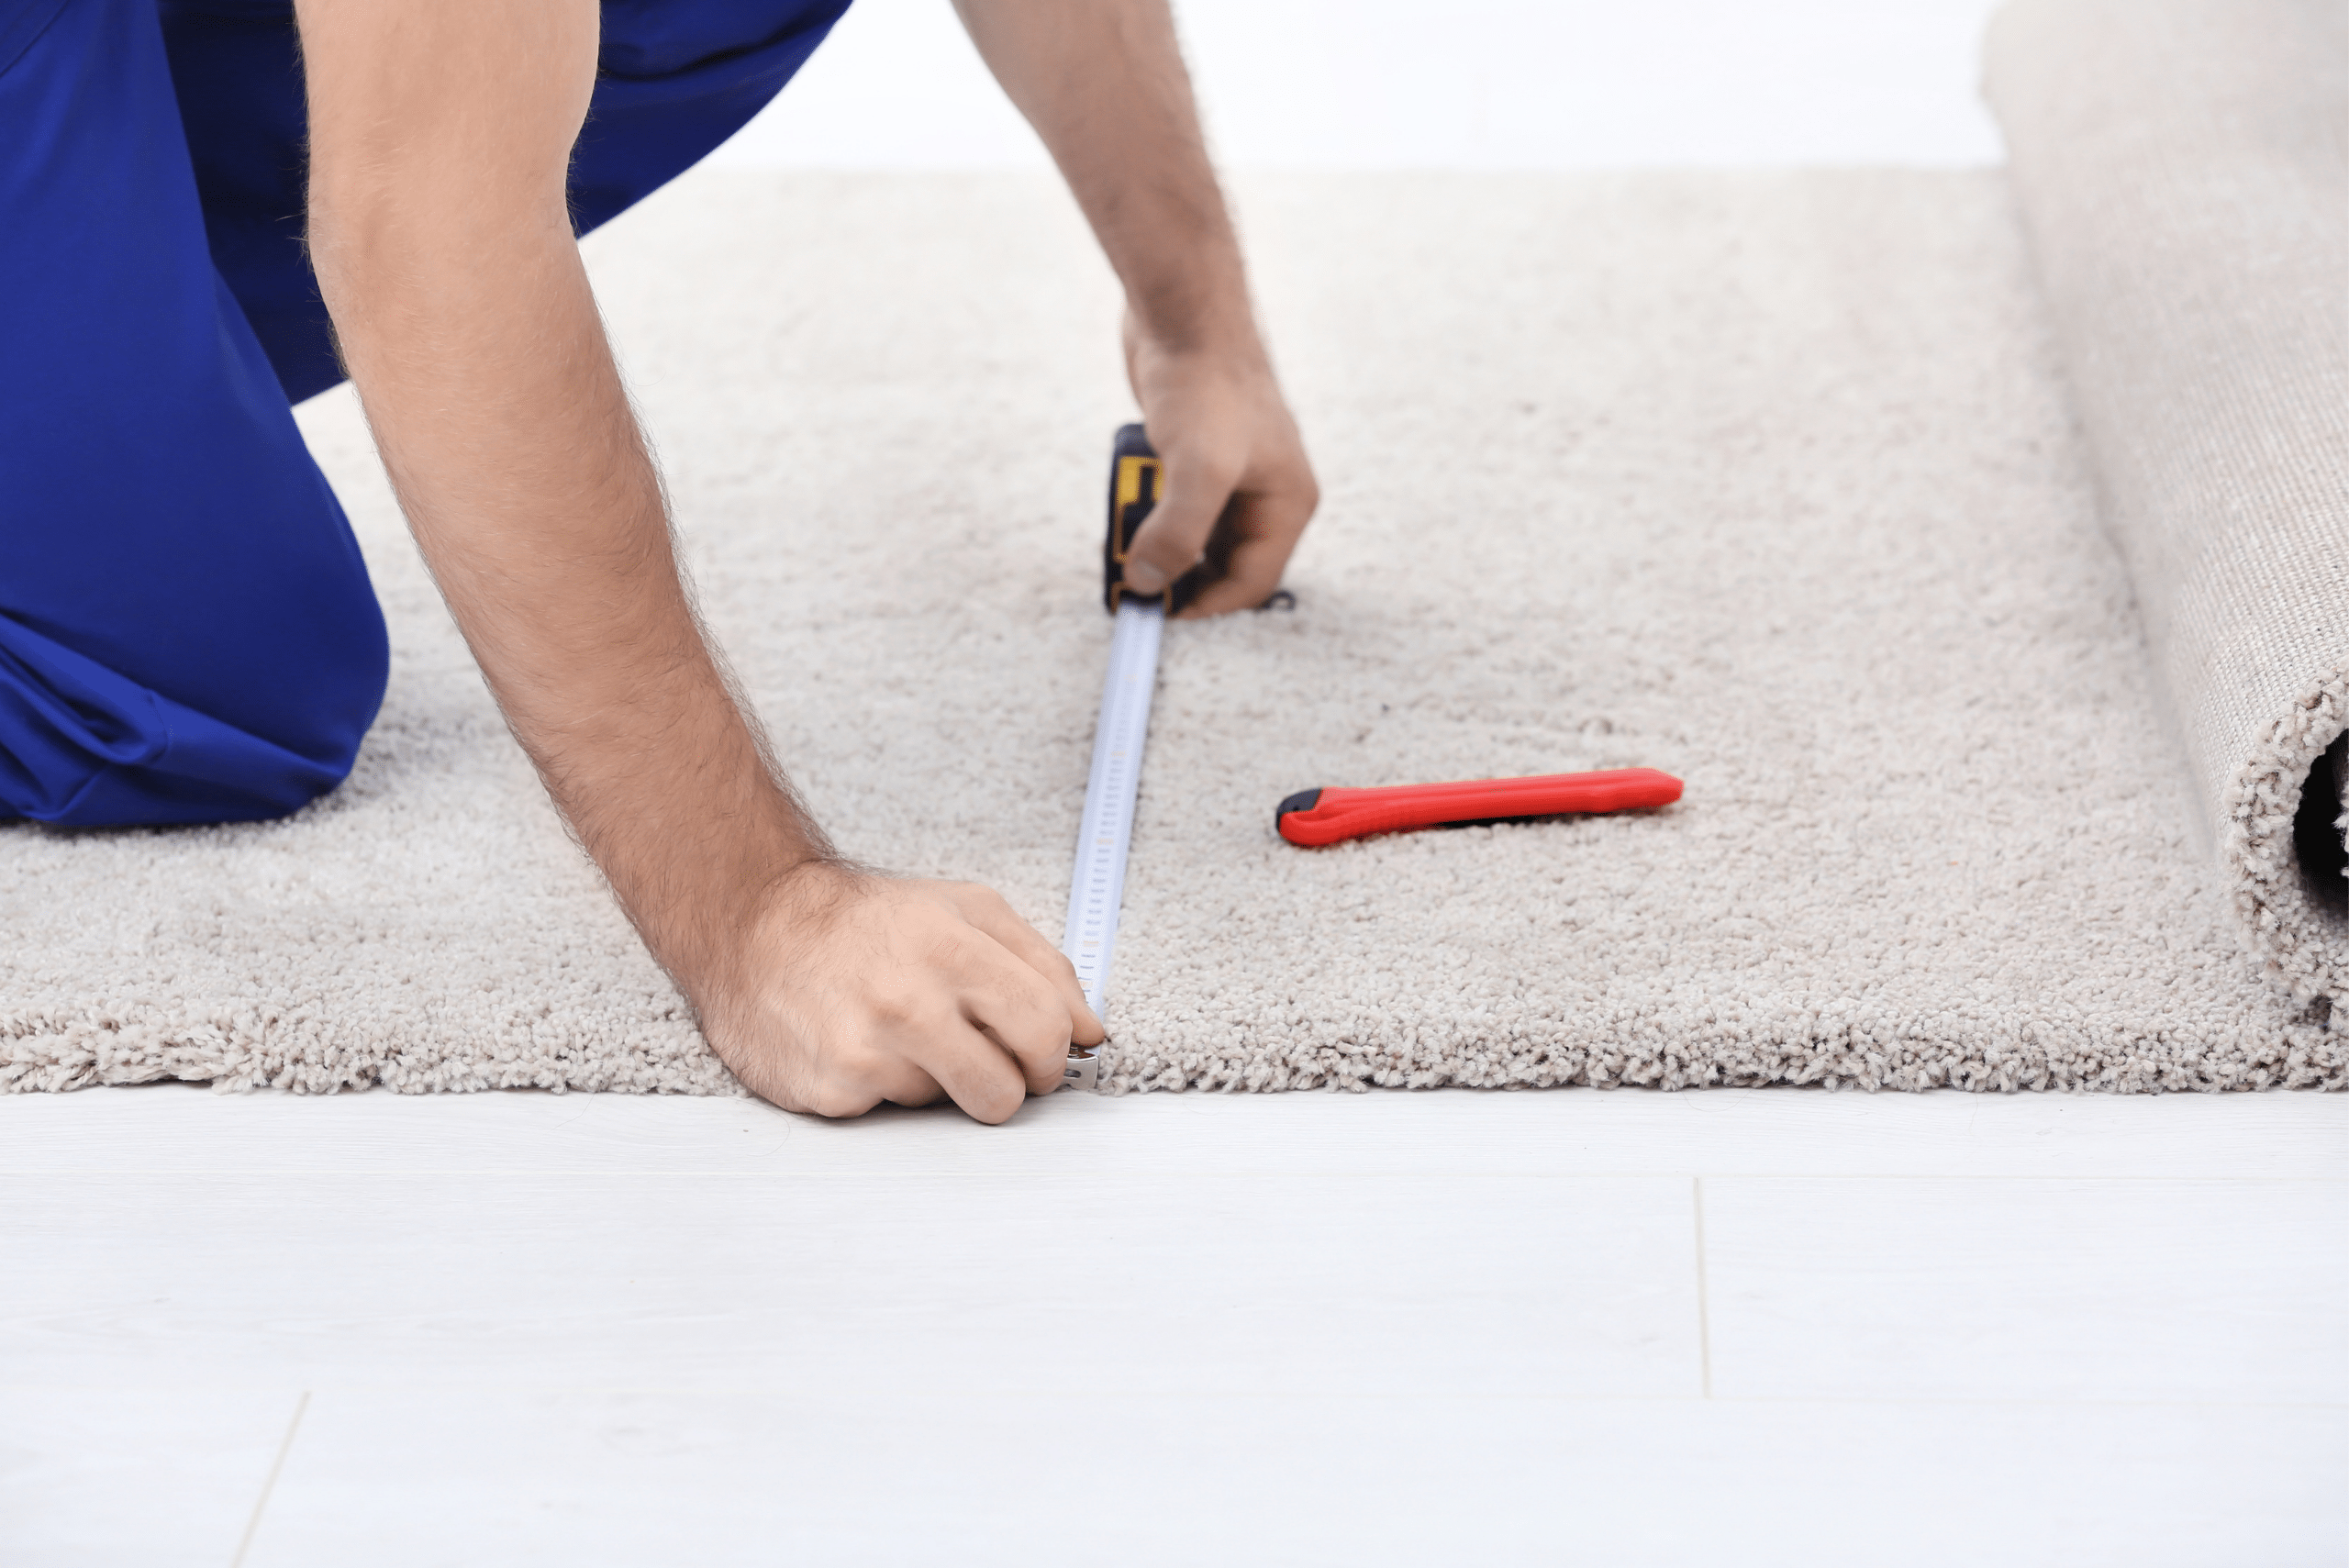 Worker measuring carpet with red utility knife on carpet.